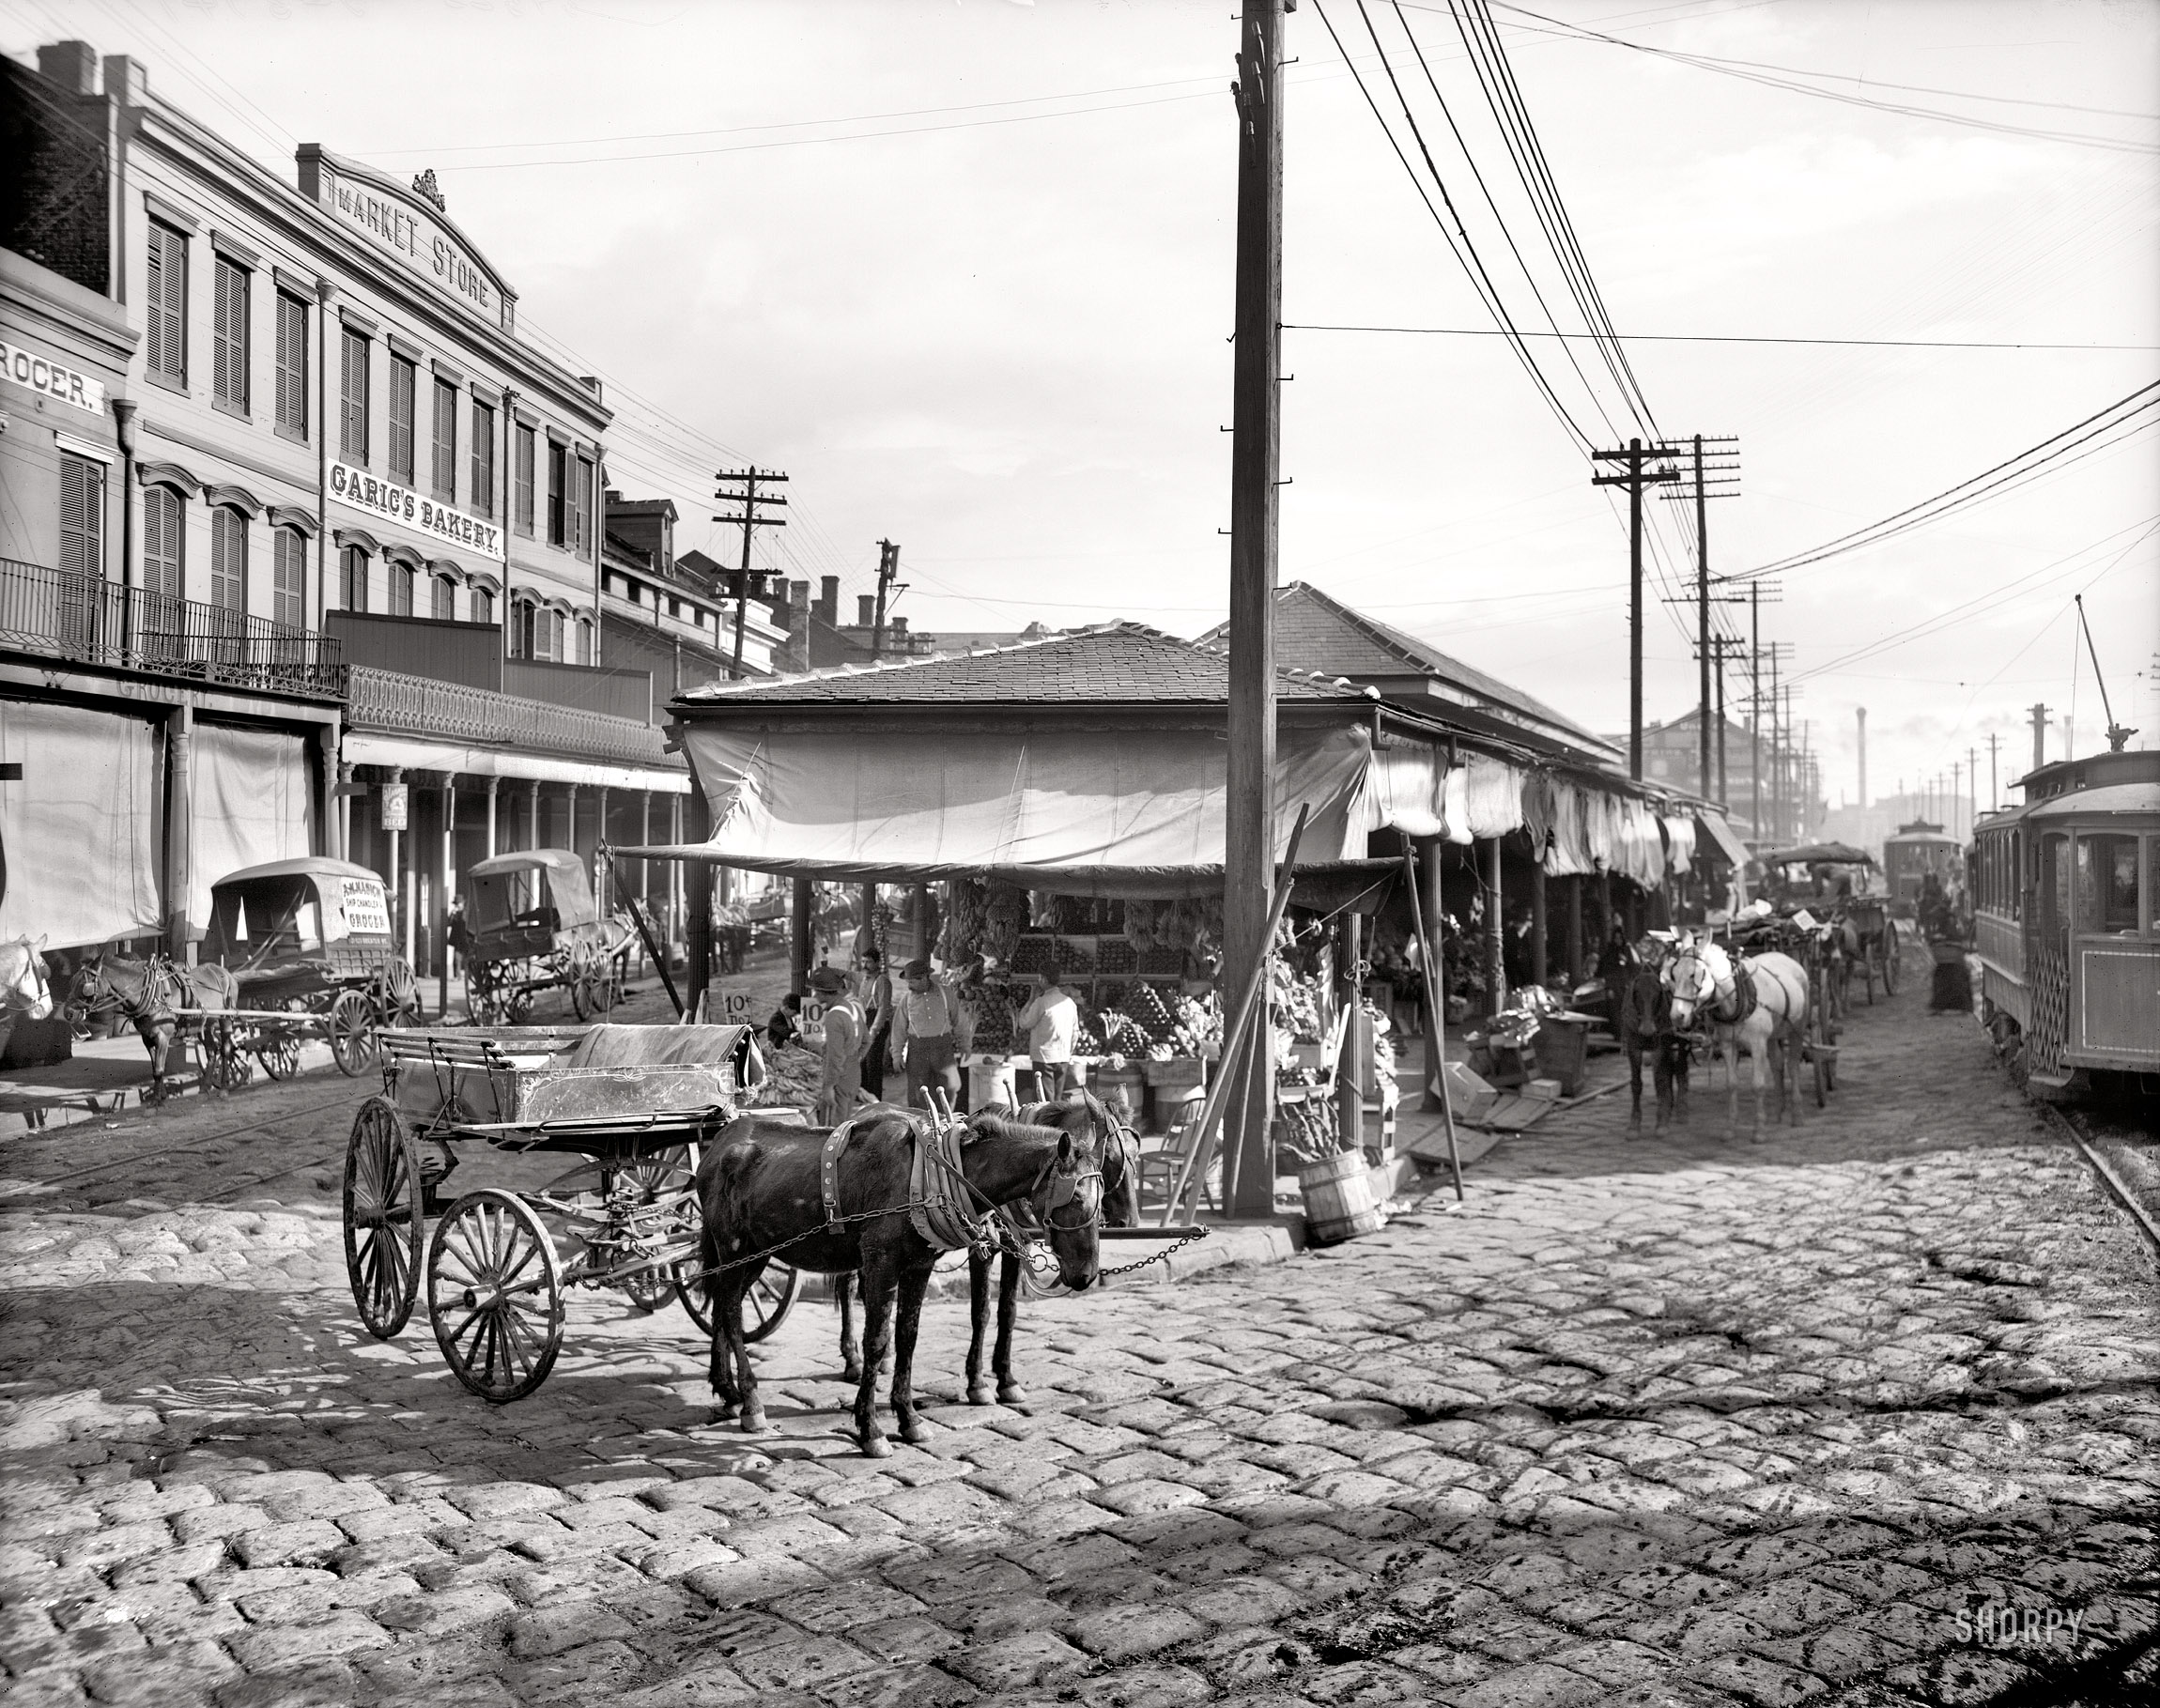 The Crescent City circa 1906. "The French Market, New Orleans." 8x10 inch dry plate glass negative, Detroit Publishing Company. View full size.